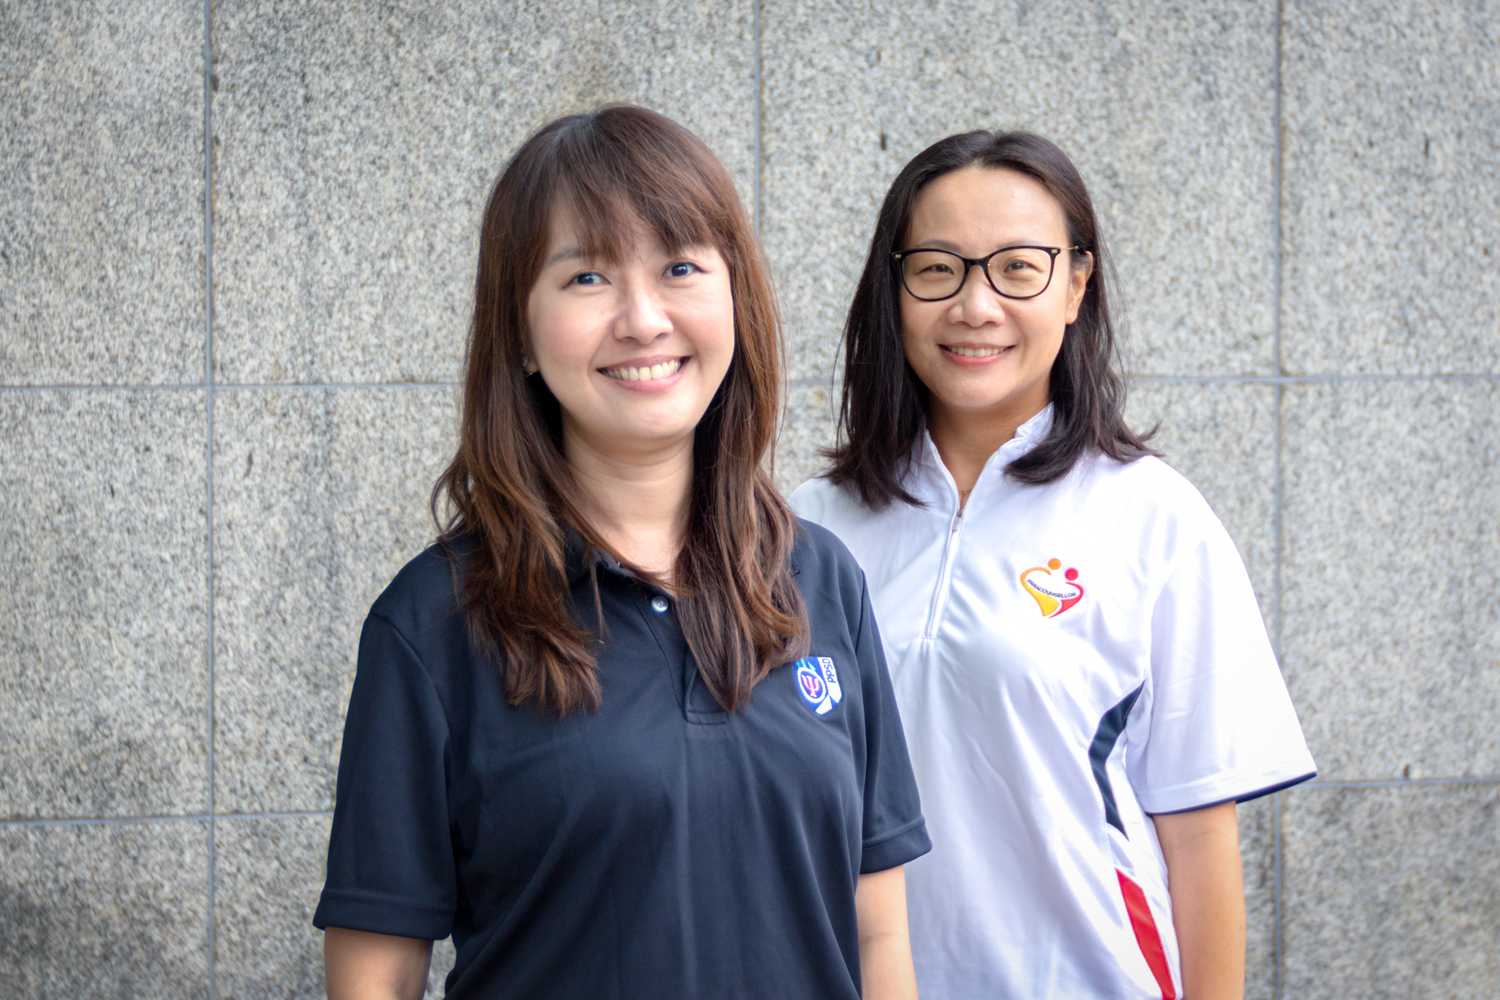 A profile shot with two women wearing plainclothes smiling and staring at the camera. PPSD Principal Psychologist Ms Ho Hui Fen is on the left while Deputy Chairperson of the Paracounsellor Committee DAC Tay Wee Li is on the right.